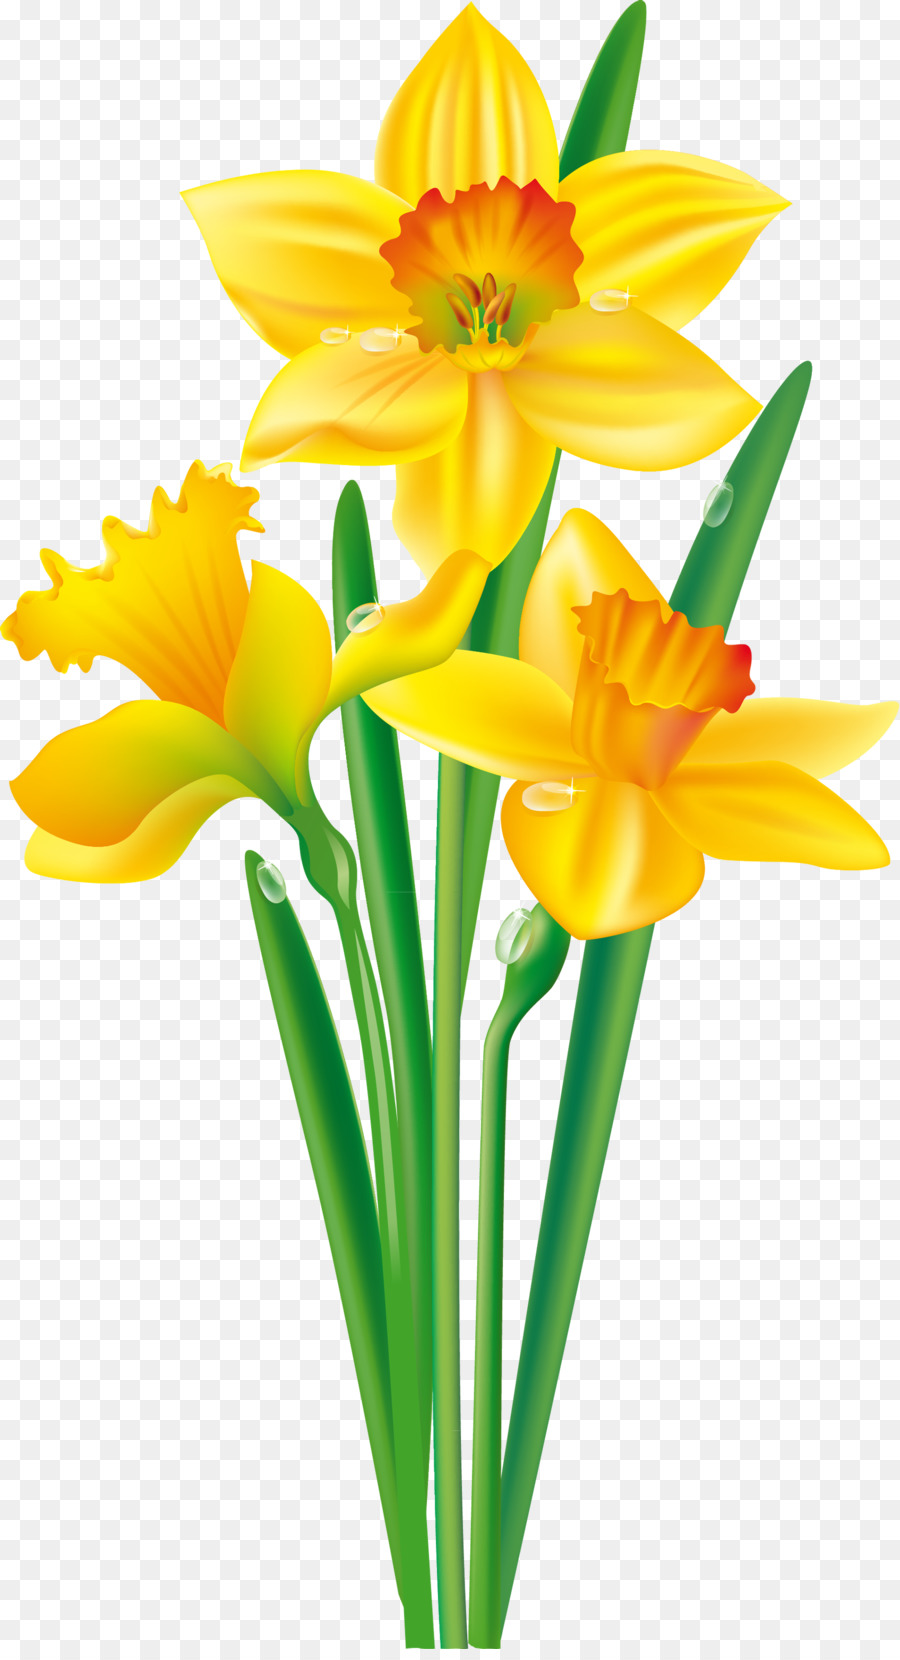 Daffodil Flower Clip Art Clipart Panda Free Clipart Images Flower | My ...